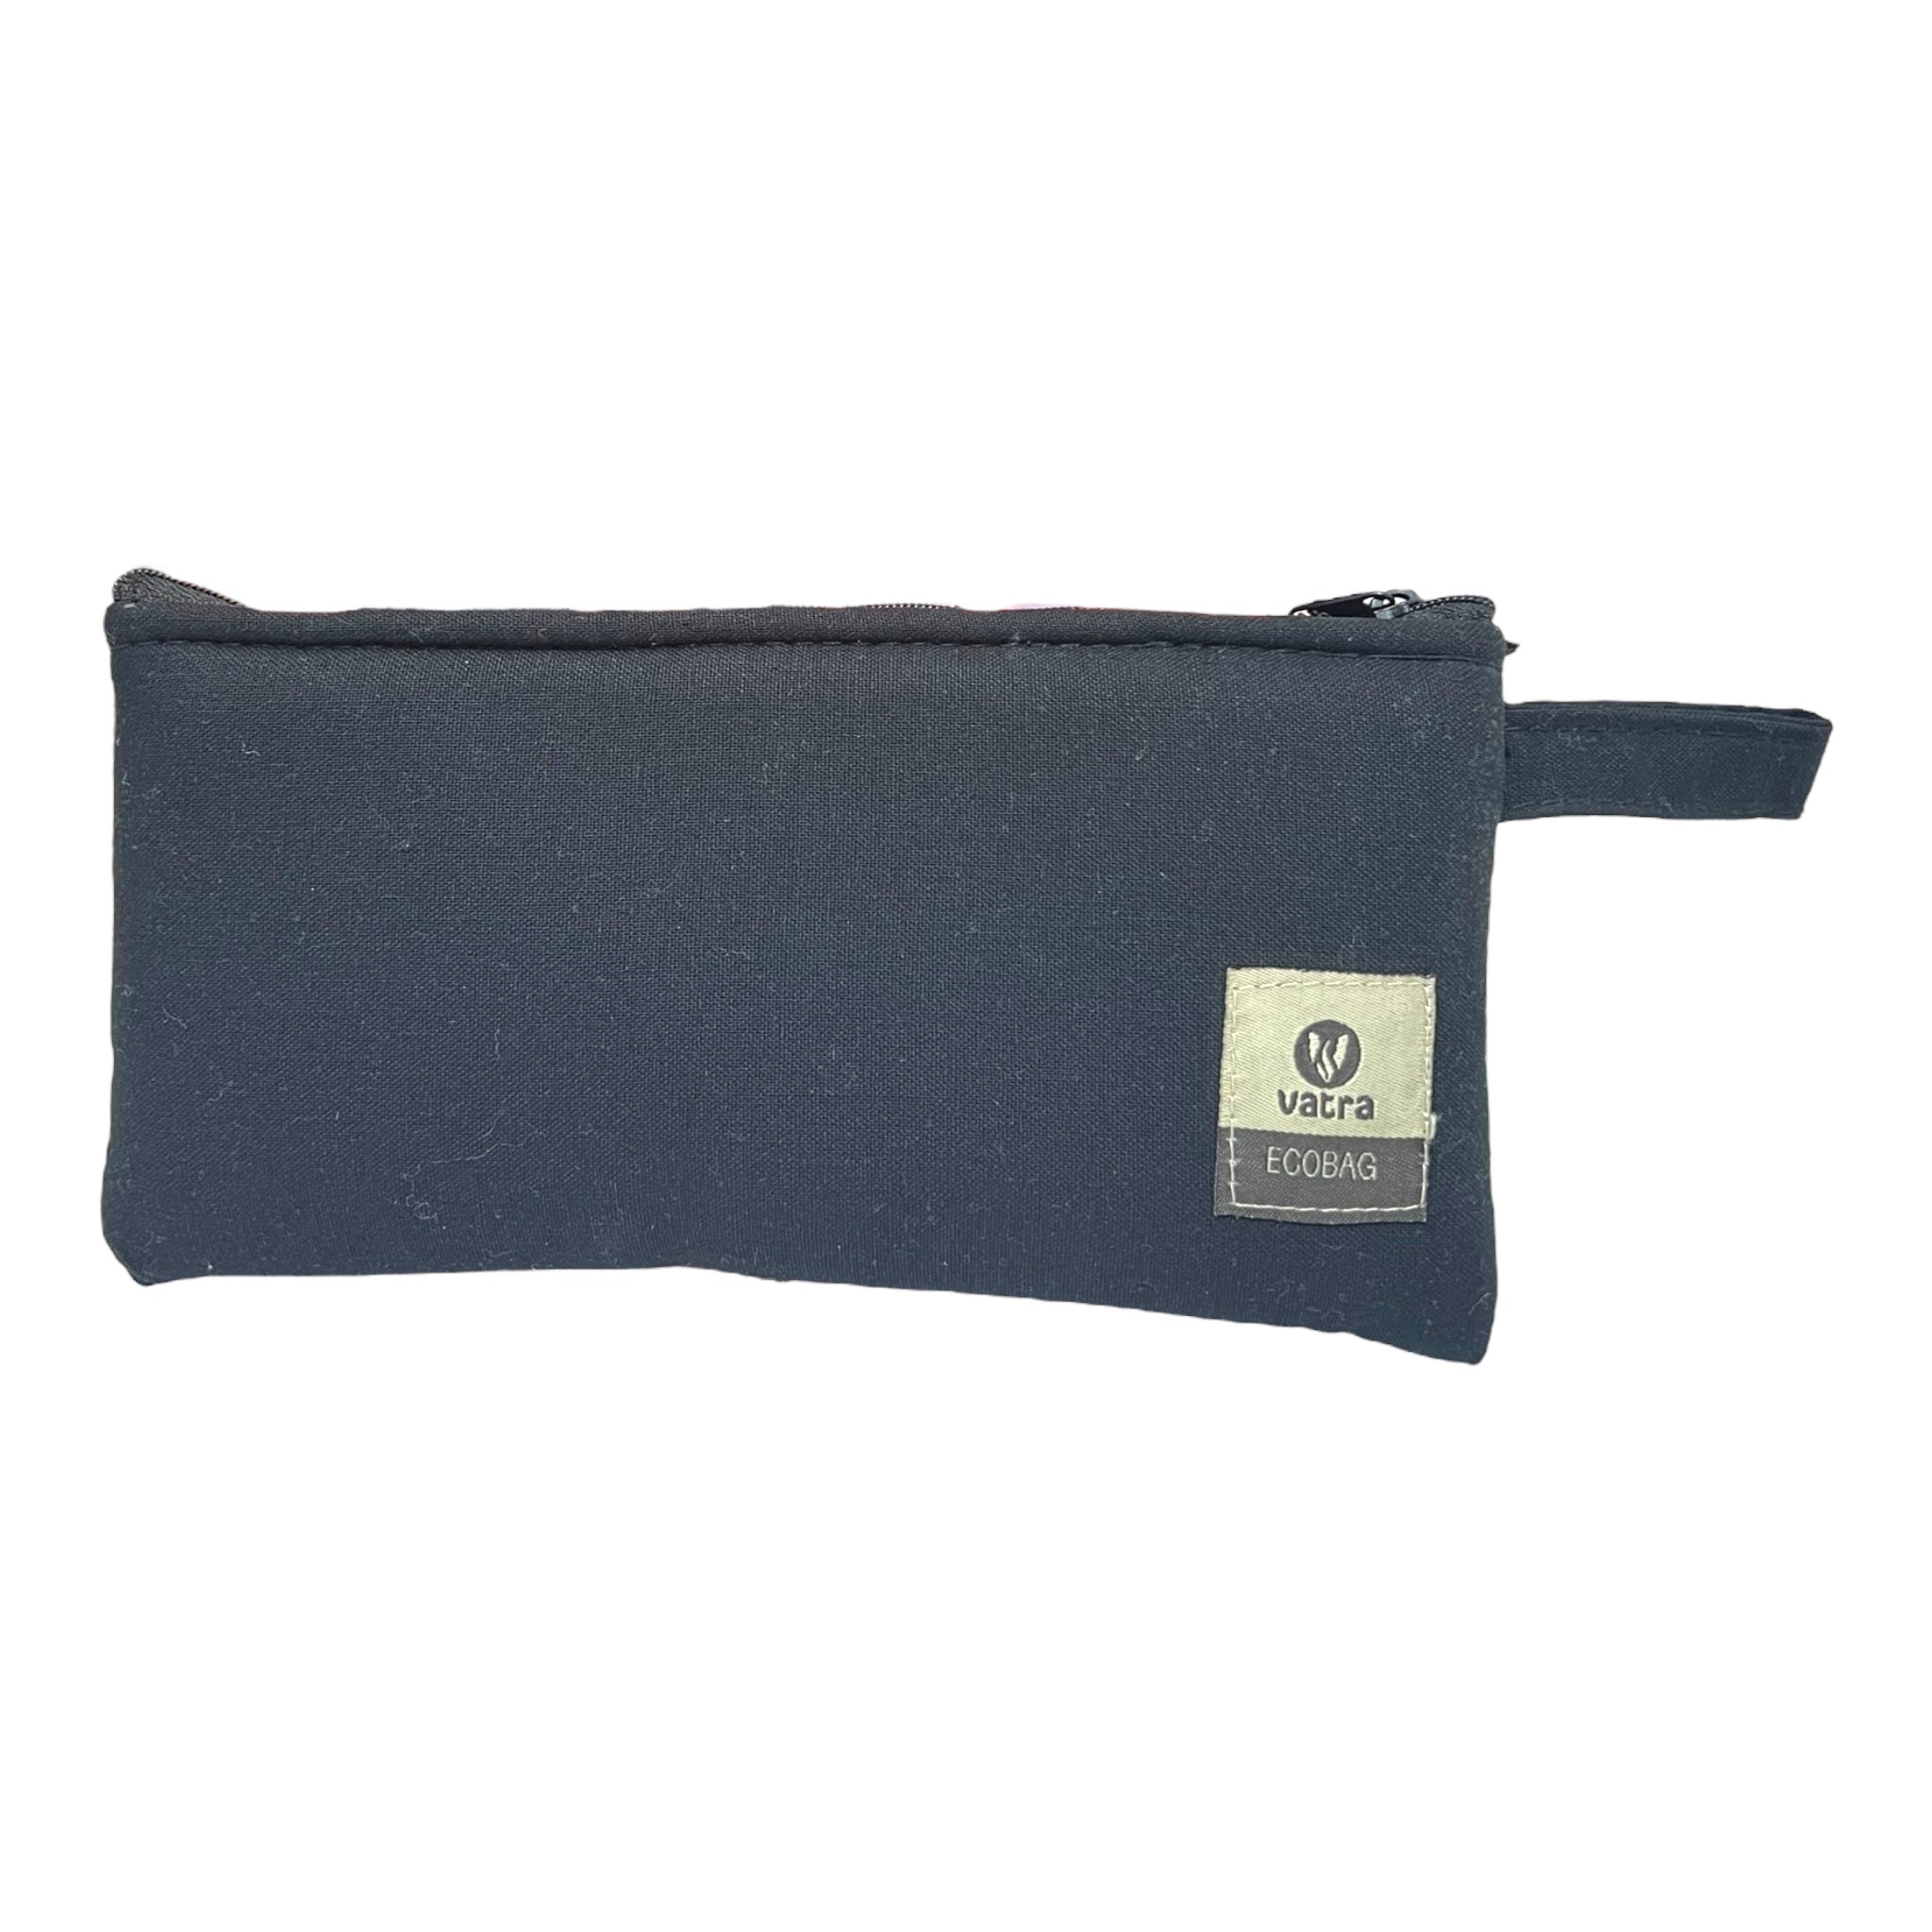 Vatra Smell Proof Bags